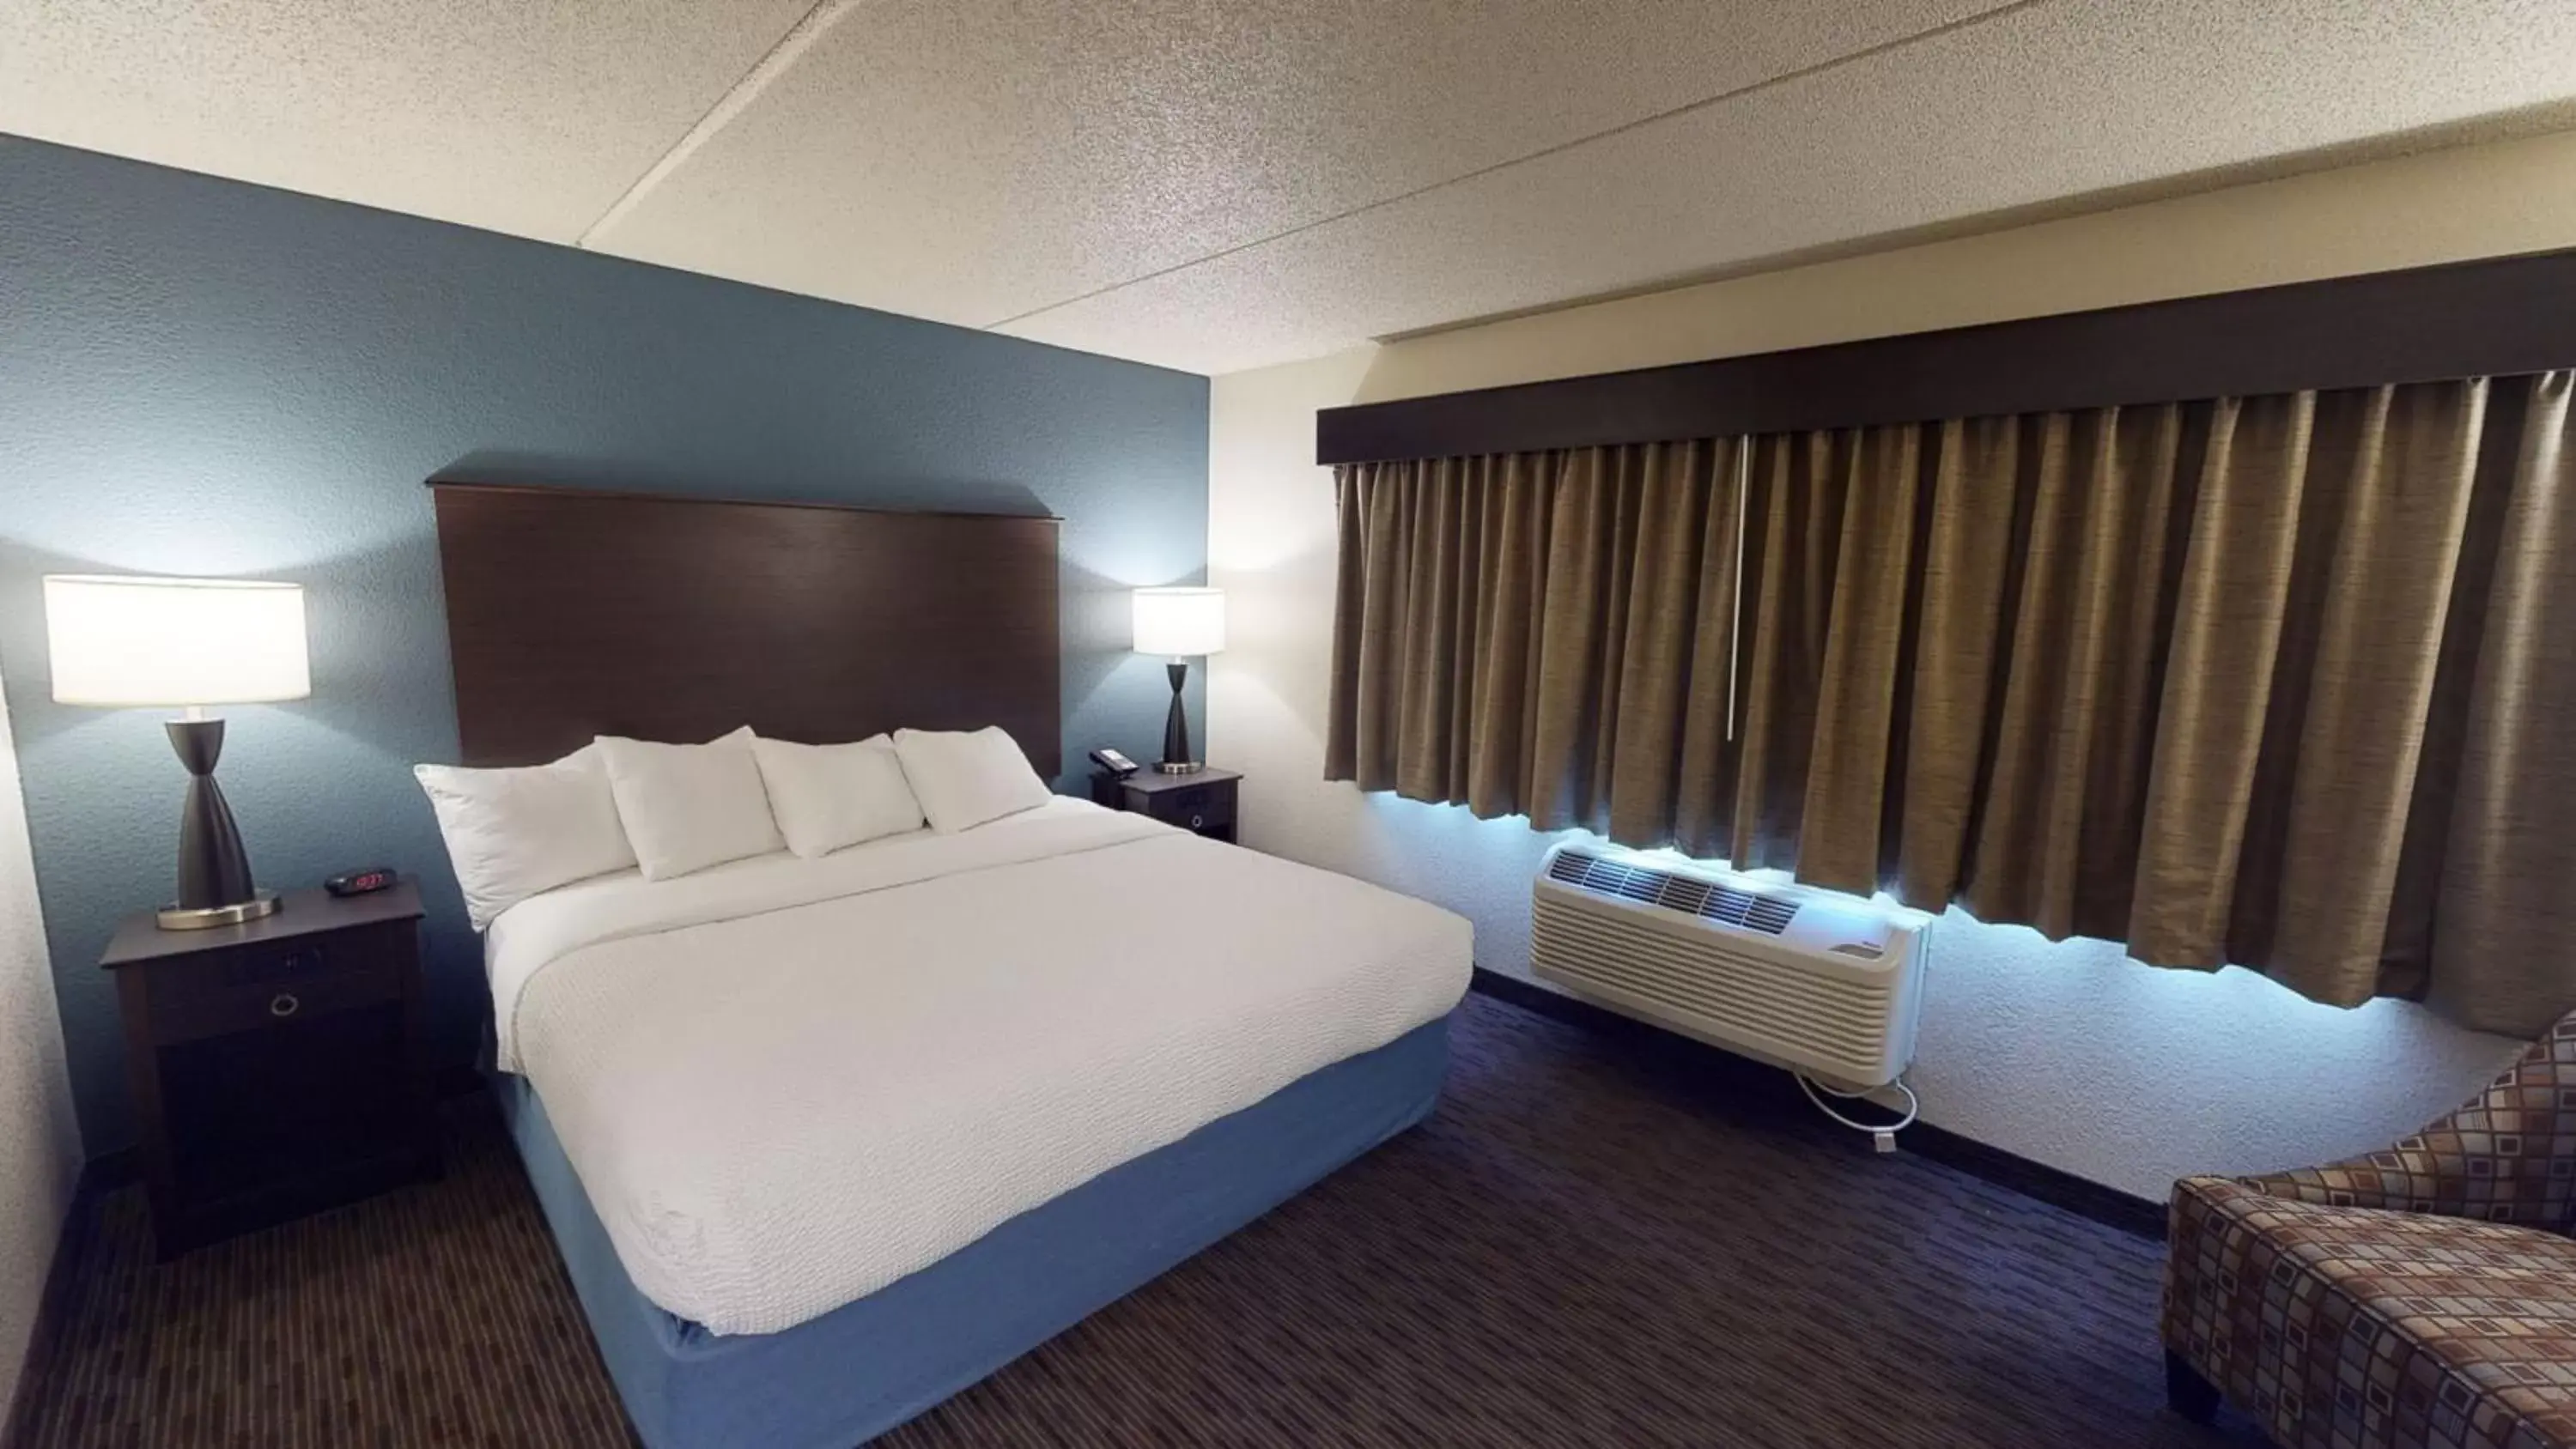 Bedroom, Bed in AmericInn by Wyndham Mounds View Minneapolis